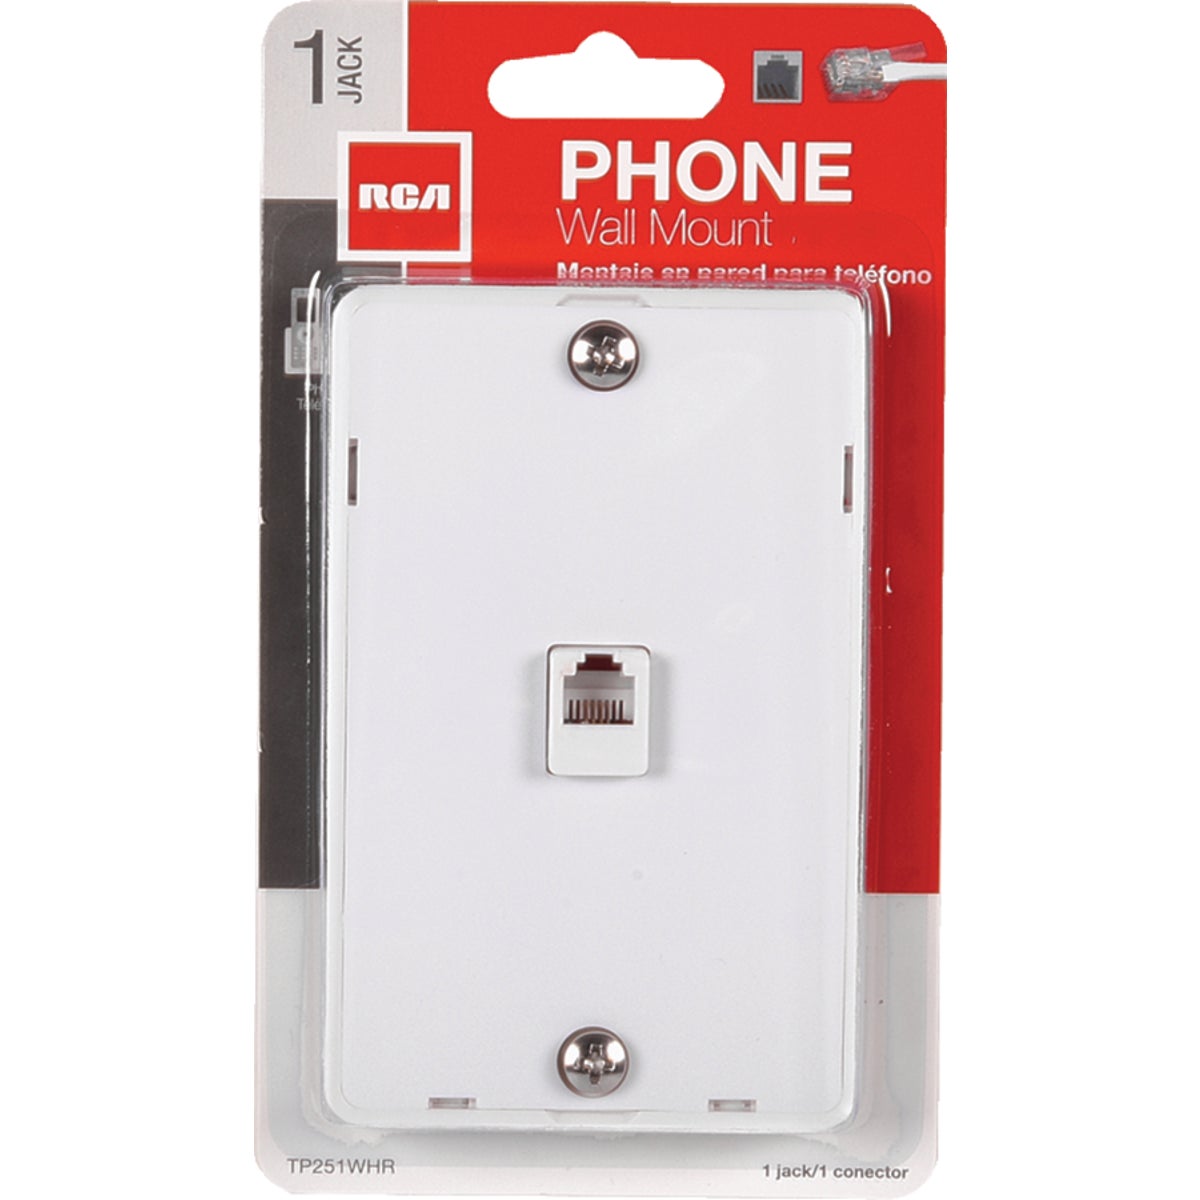 Item 535435, Phone jack wall mounts are designed for easy mounting of wall phones.